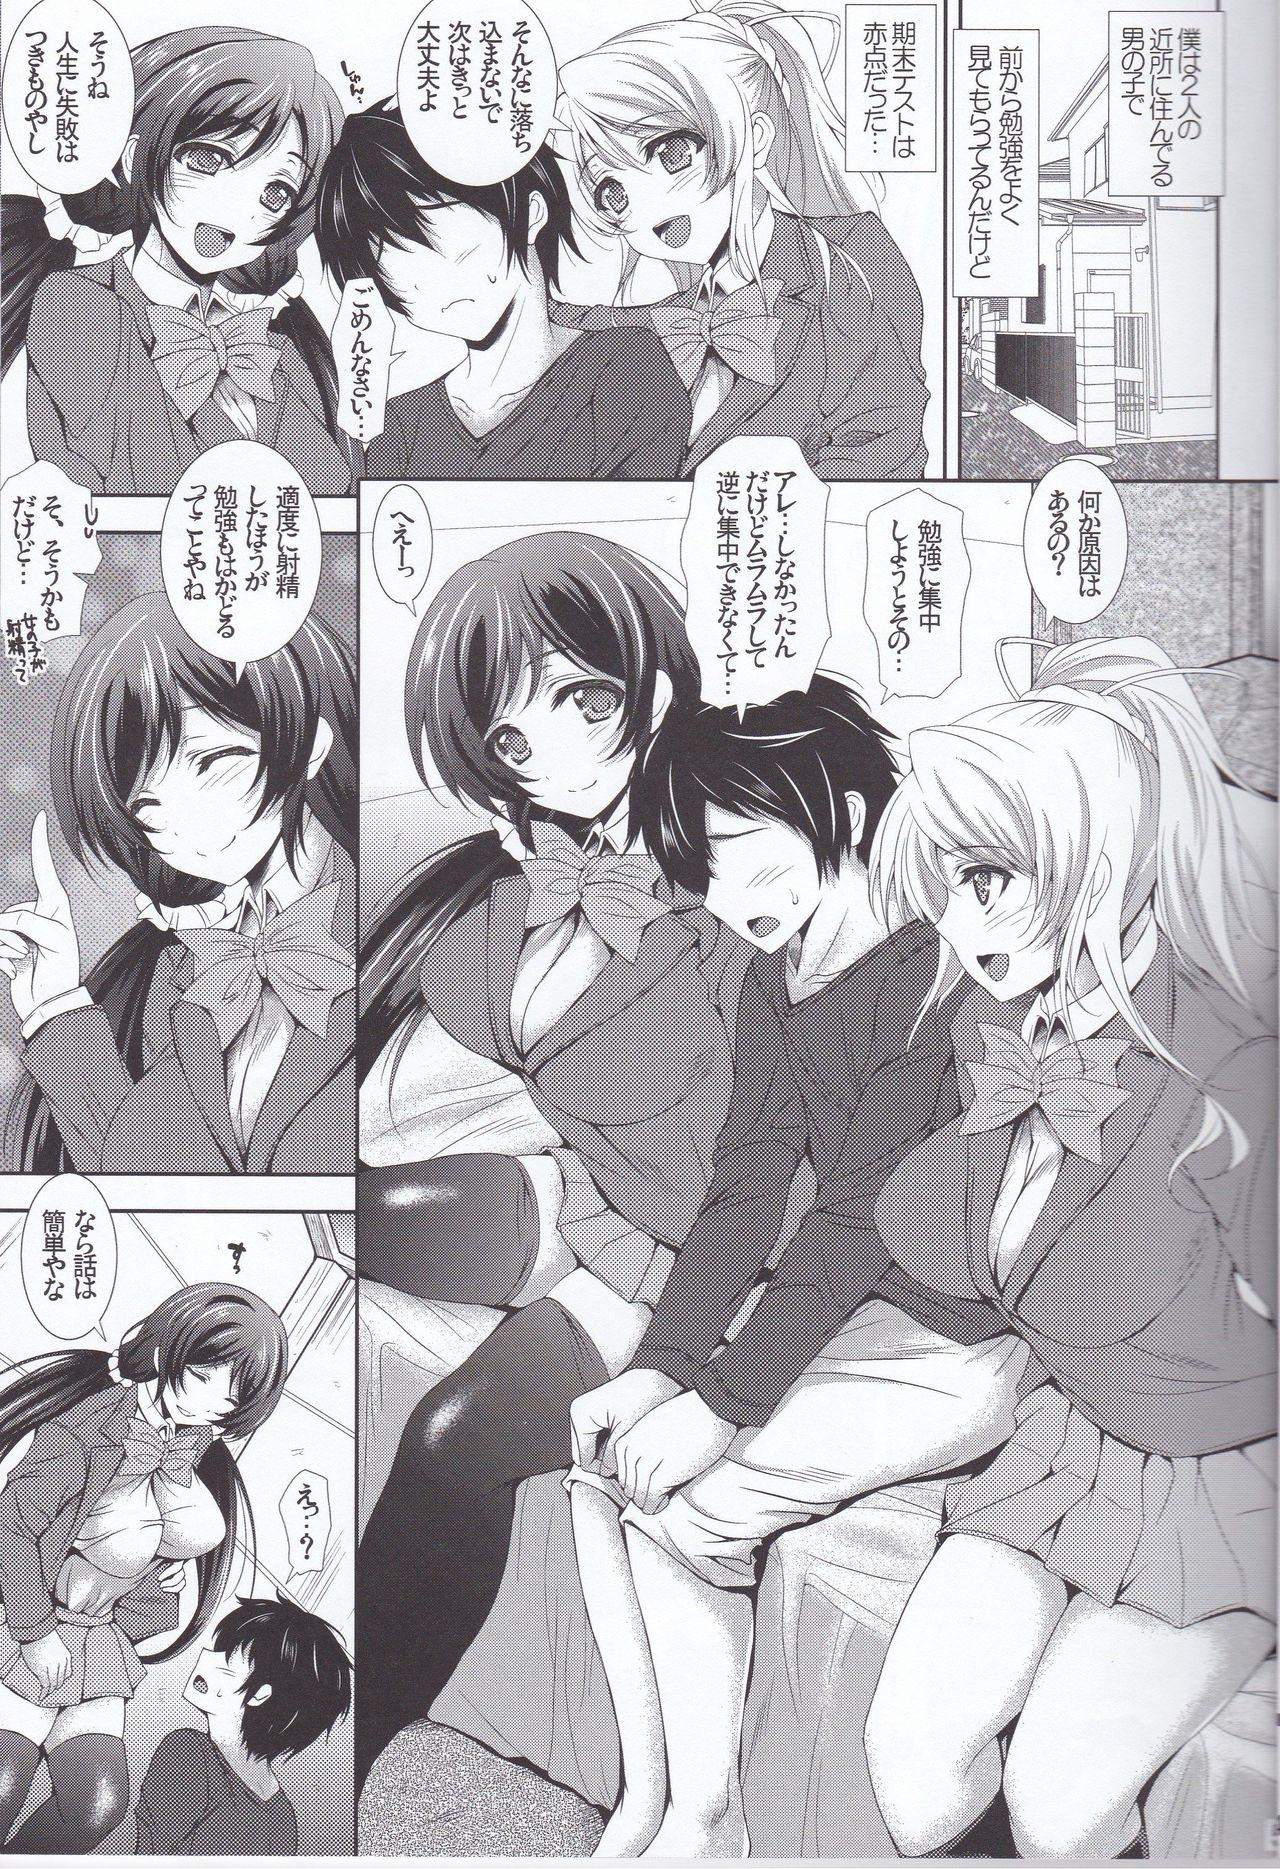 Dancing Love Lesson! - Love live Bang Bros - Page 4